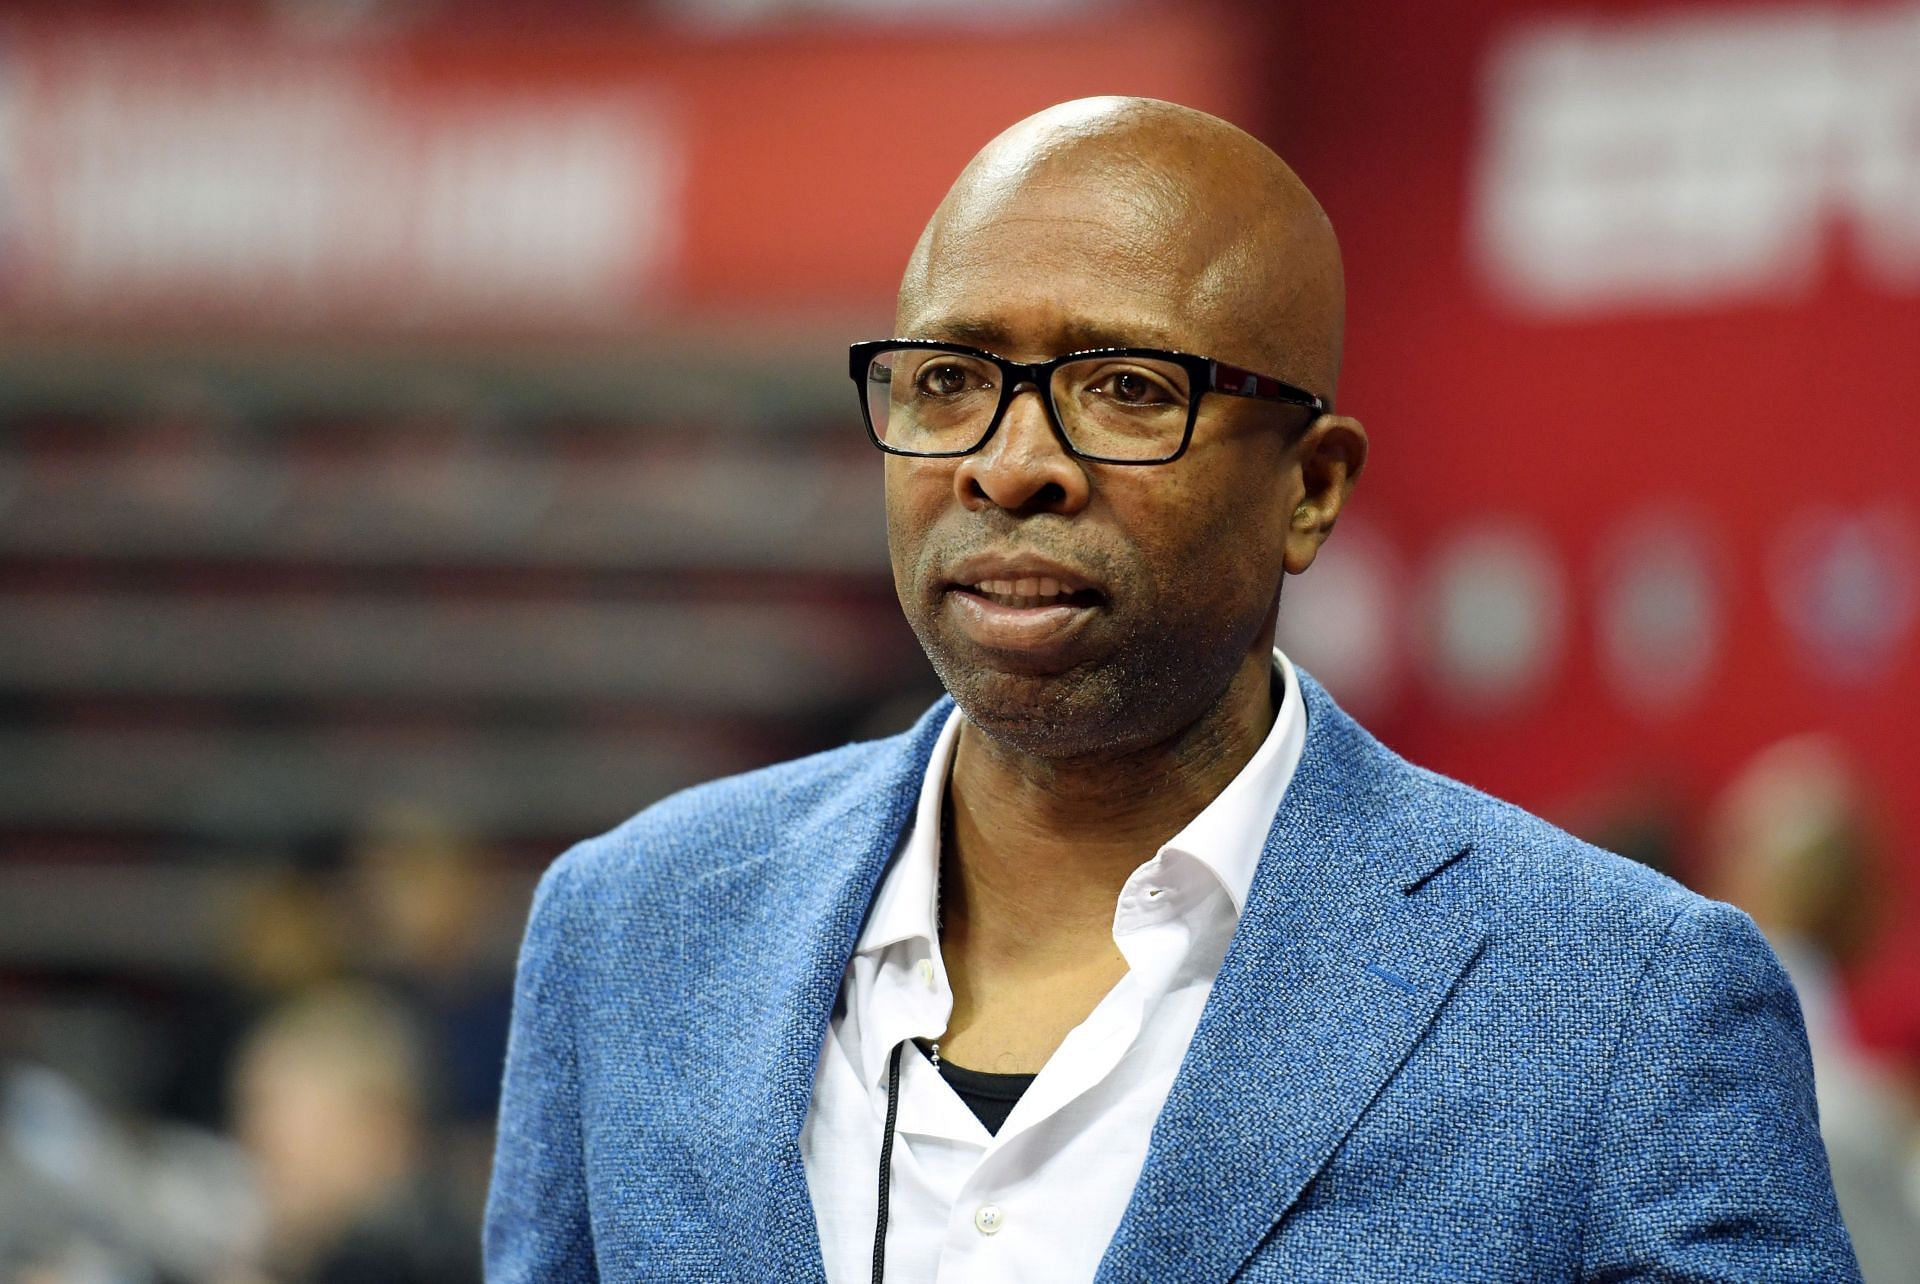 Former NBA player Kenny Smith stars in the new film Hustle.